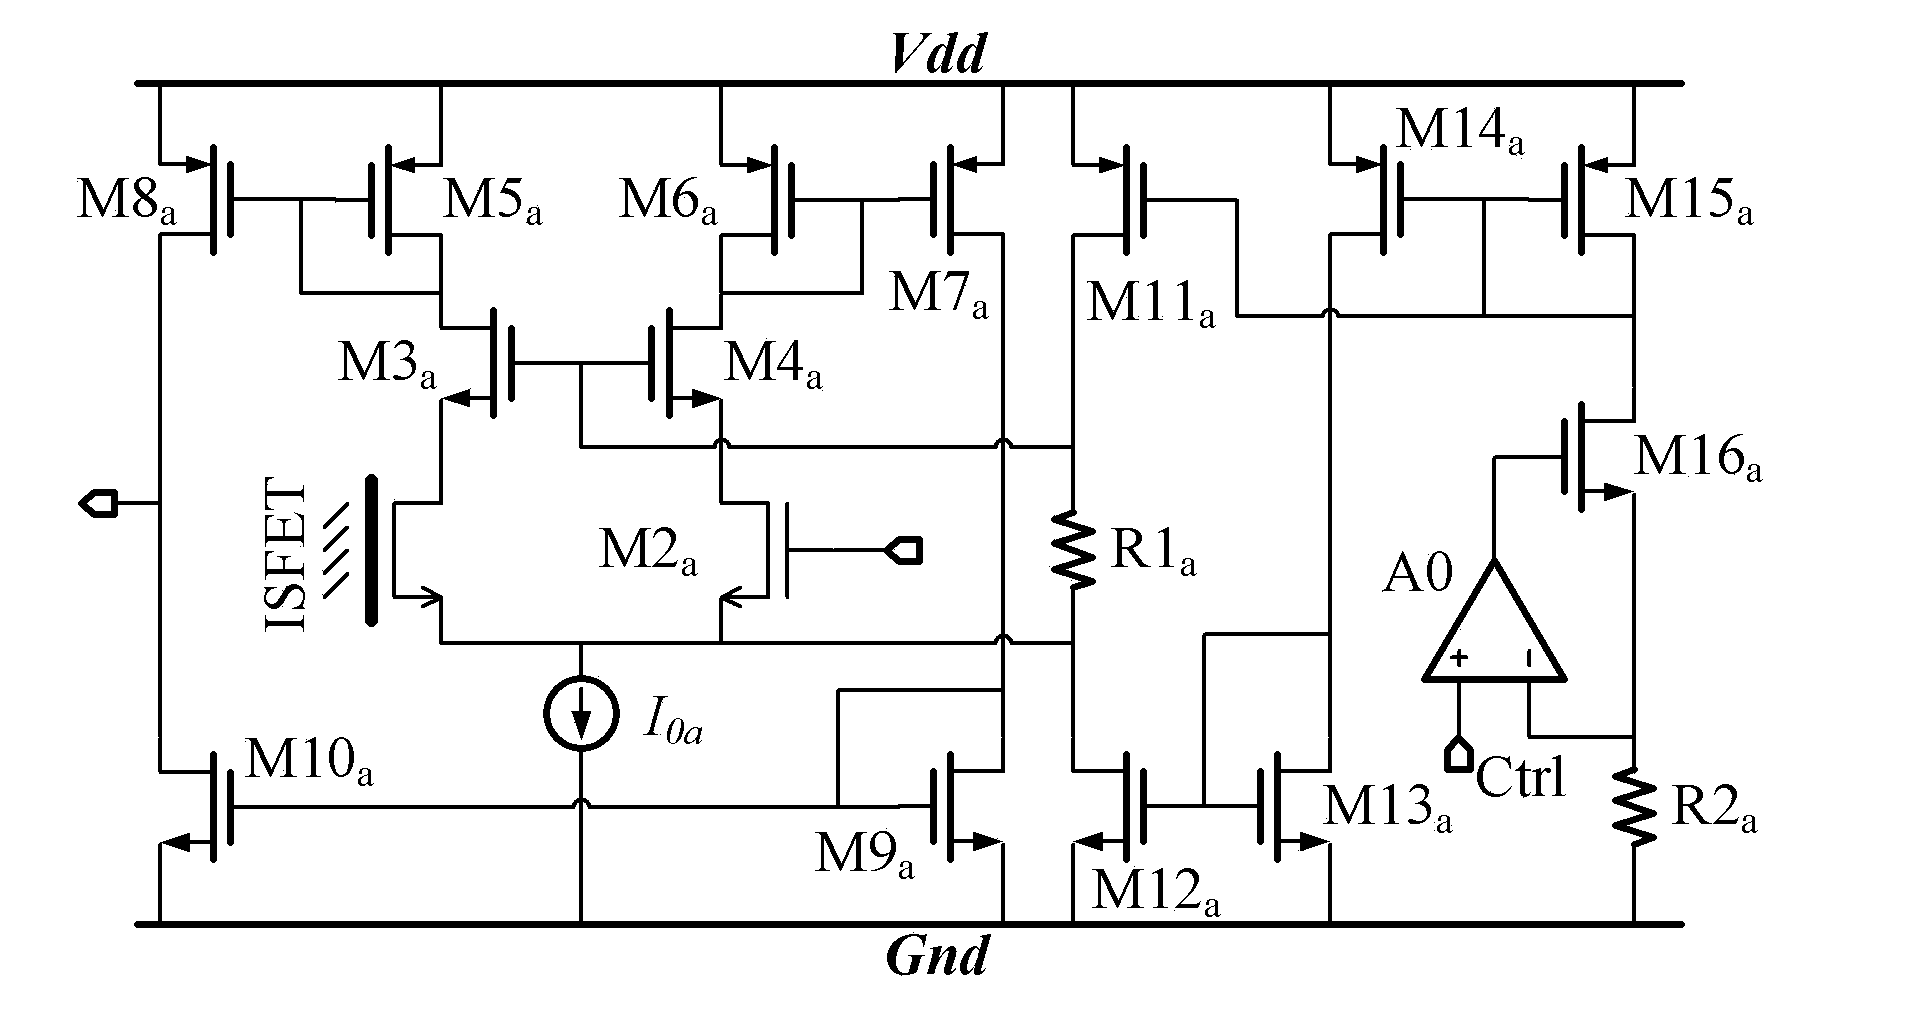 Multichannel ion sensitive field effect transistor (ISFET) sensor readout circuit with compensation function